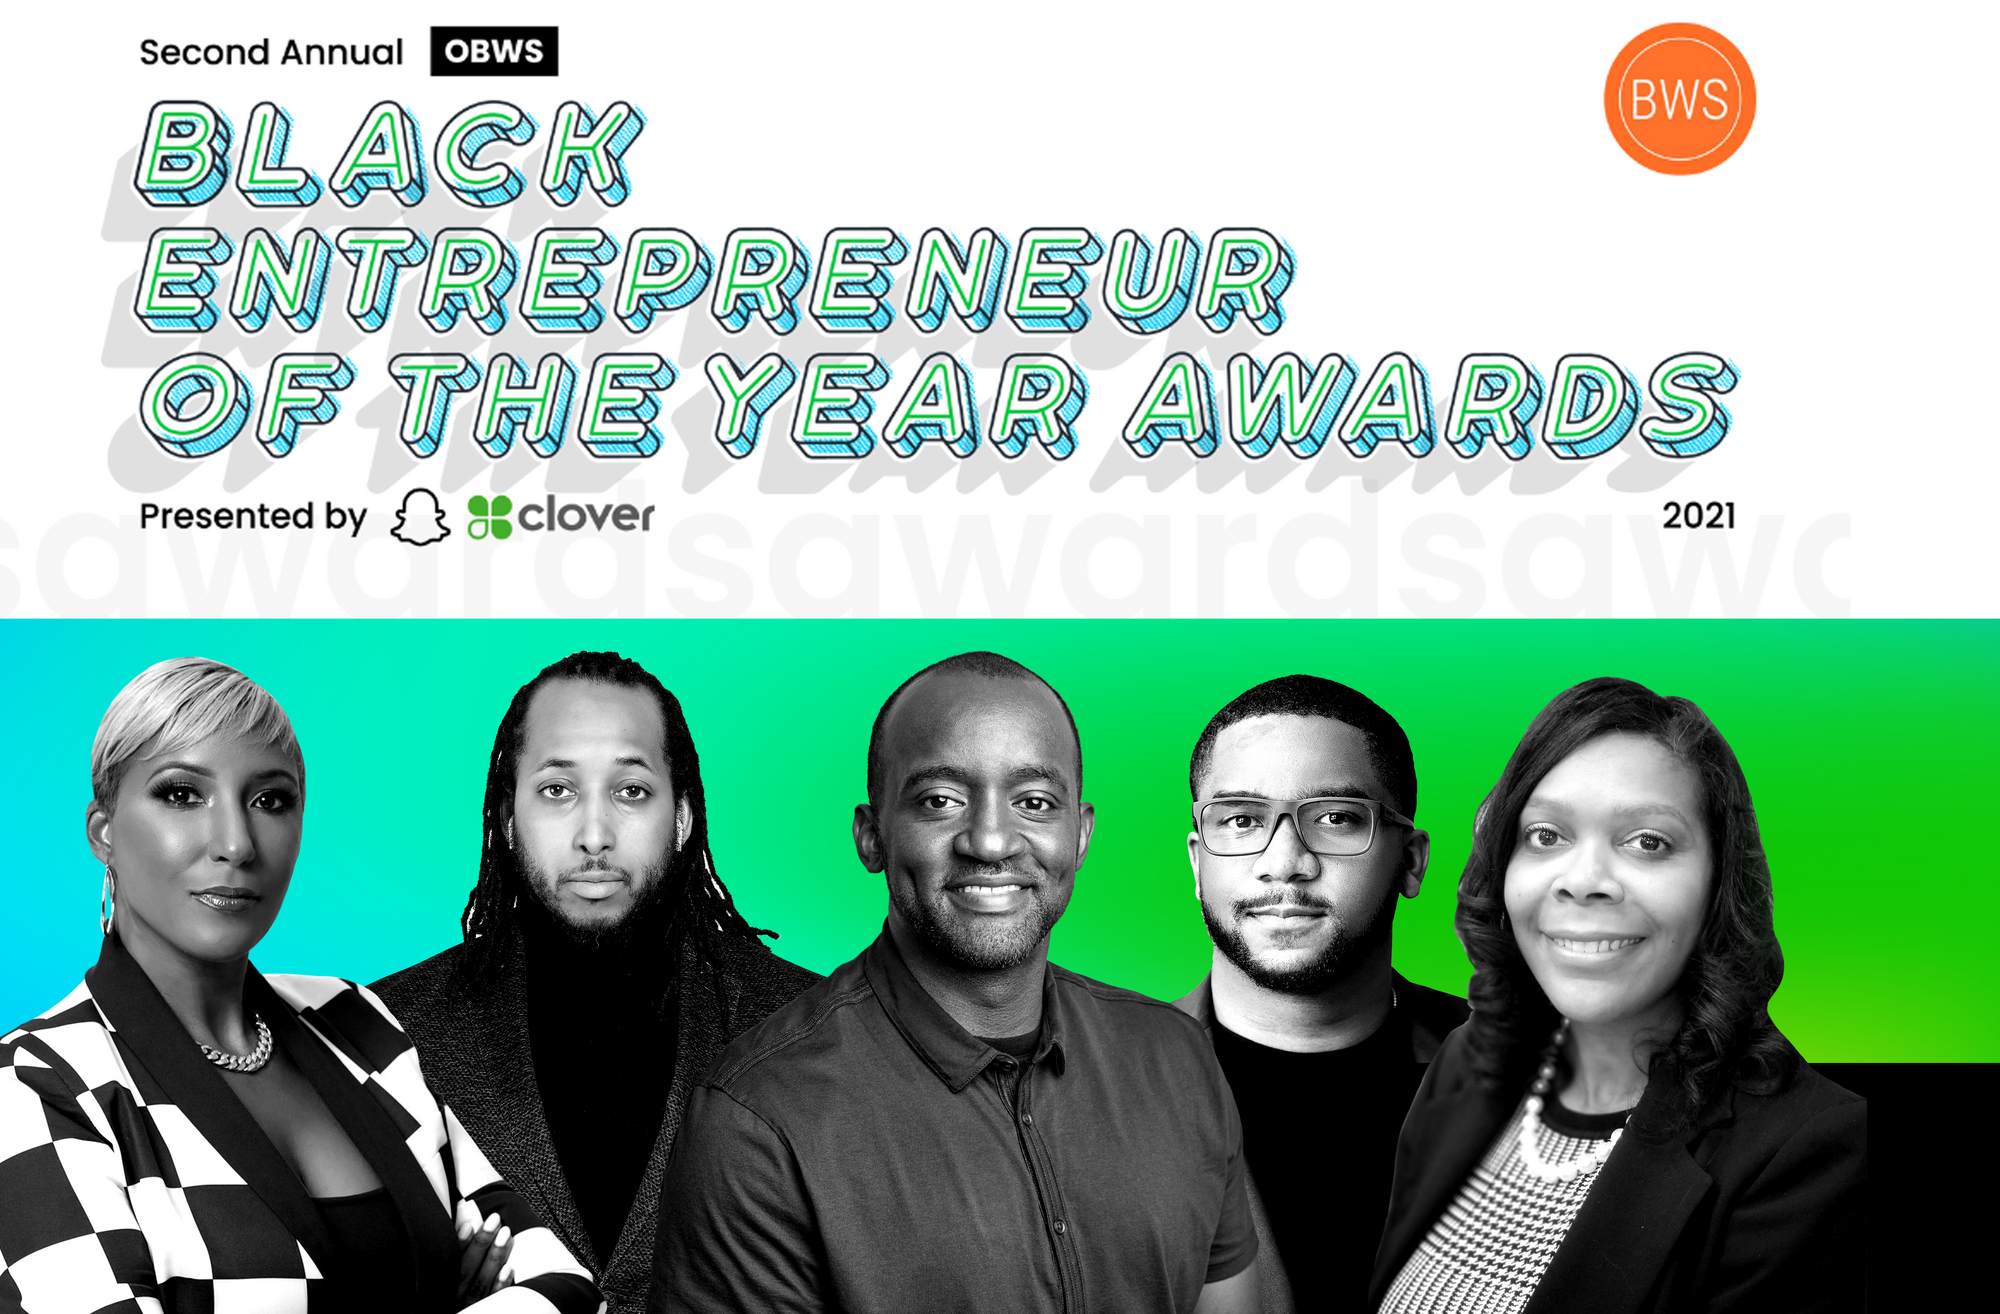 VOTE NOW for the 2021 Black Entrepreneurs of the Year - Voting ends August 29